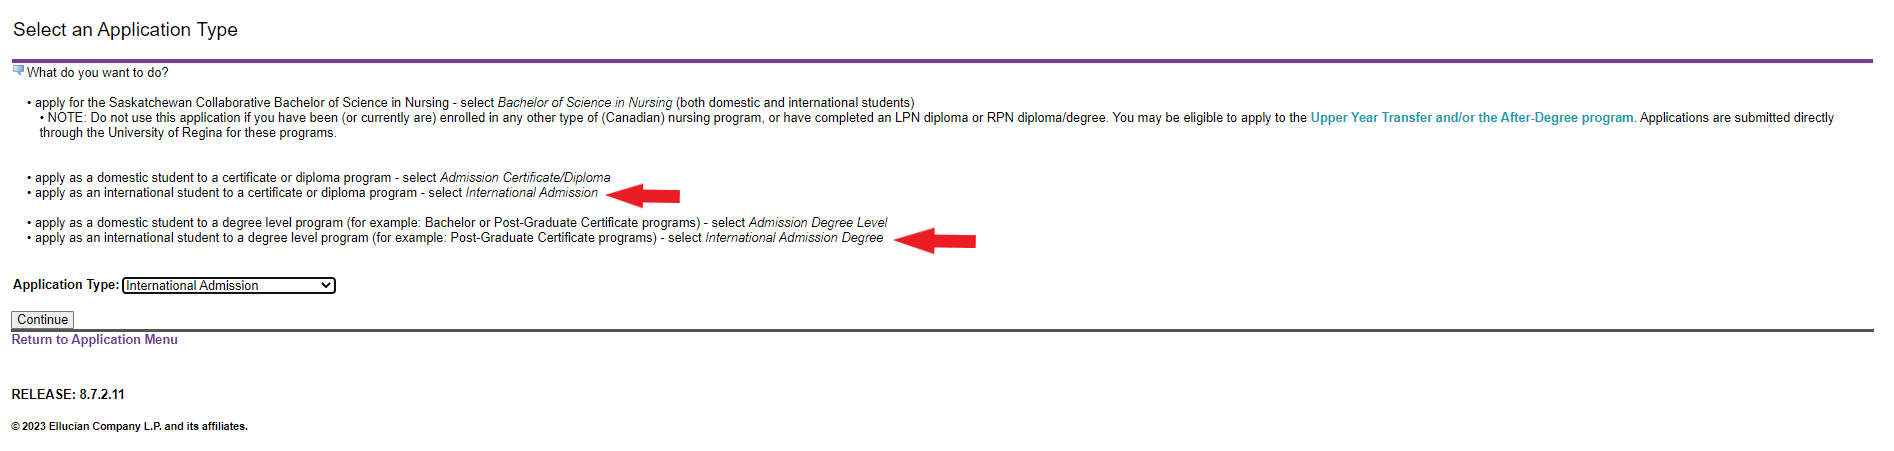 The online application page, displaying the "Select an application type" section, highlighting how to apply as an international student